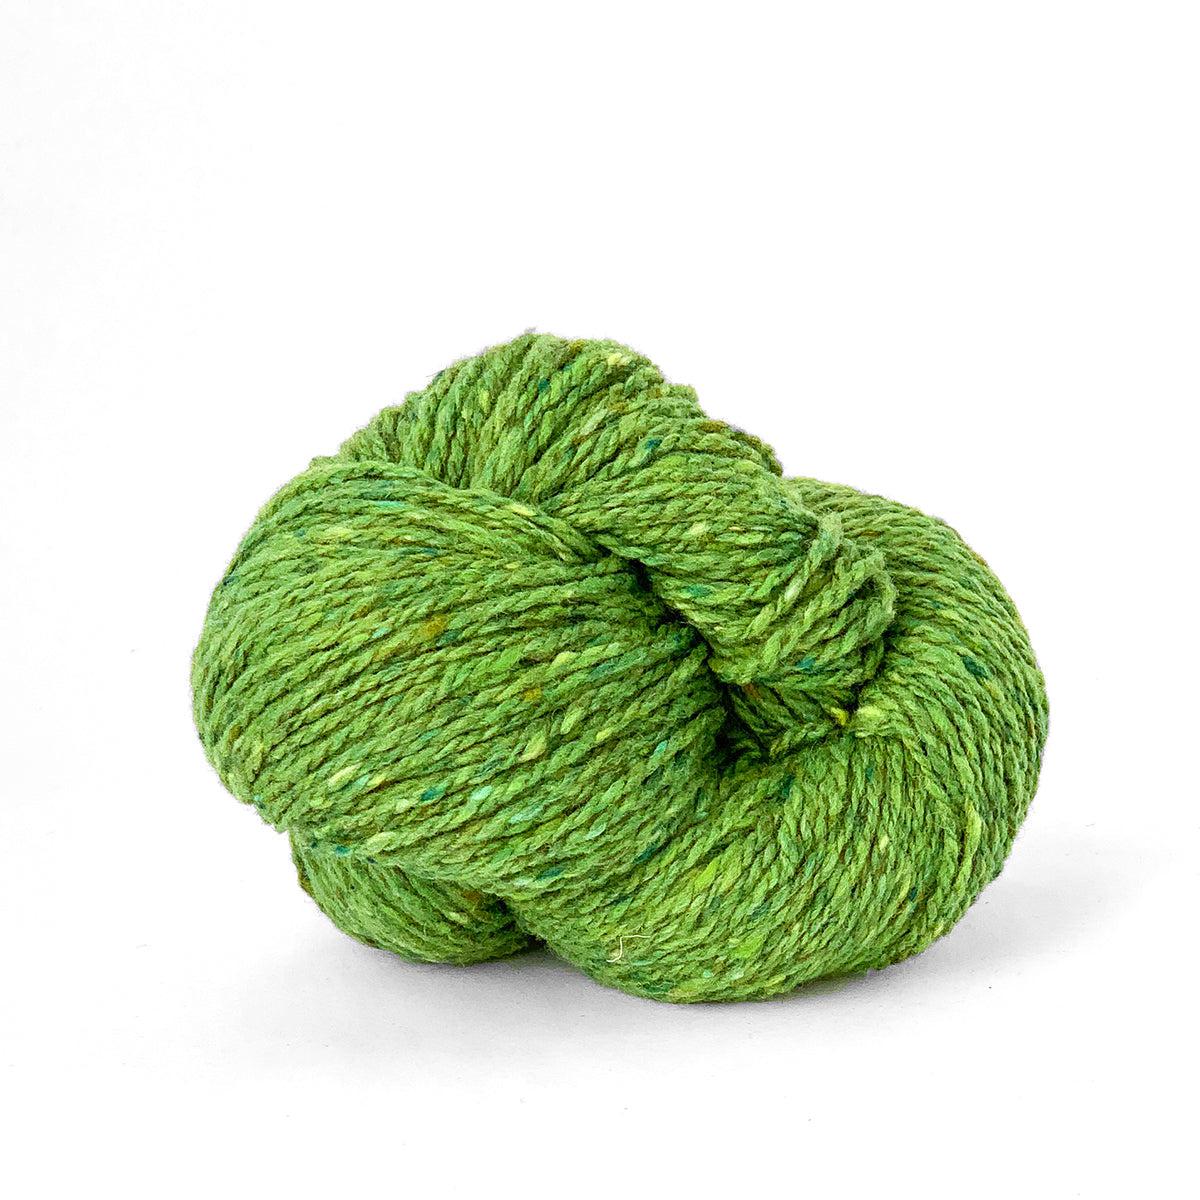 A skein of Kelbourne Woolens Lucky Tweed Sprout, a bright spring green with yellow and darker green flecks.